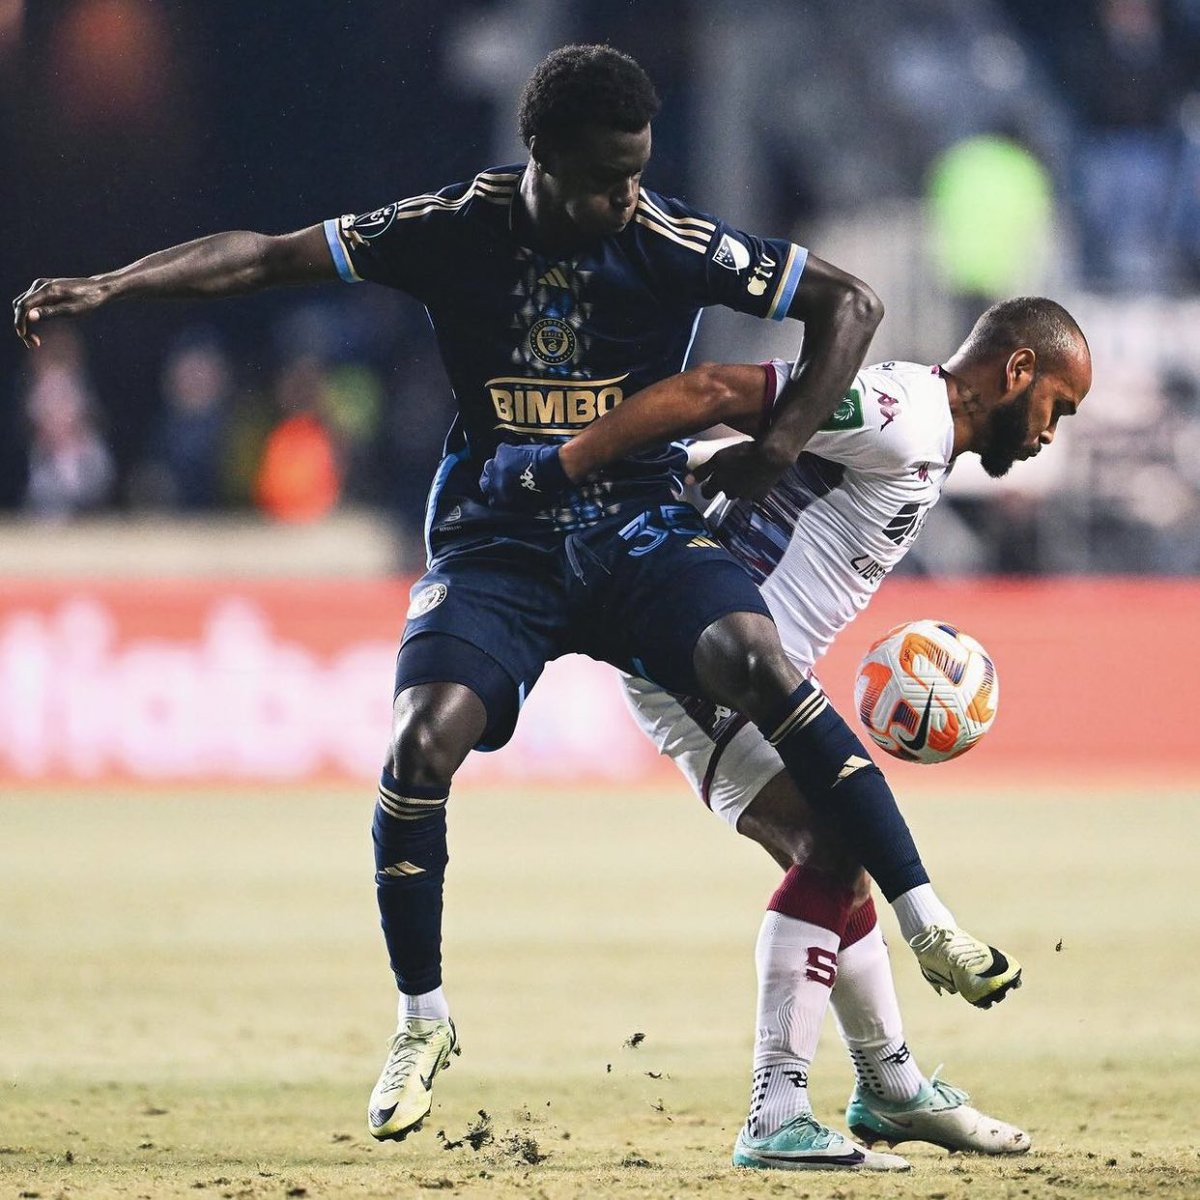 Markus Anderson made his first start for the Union last night 🔓 🔵🟡#DOOP